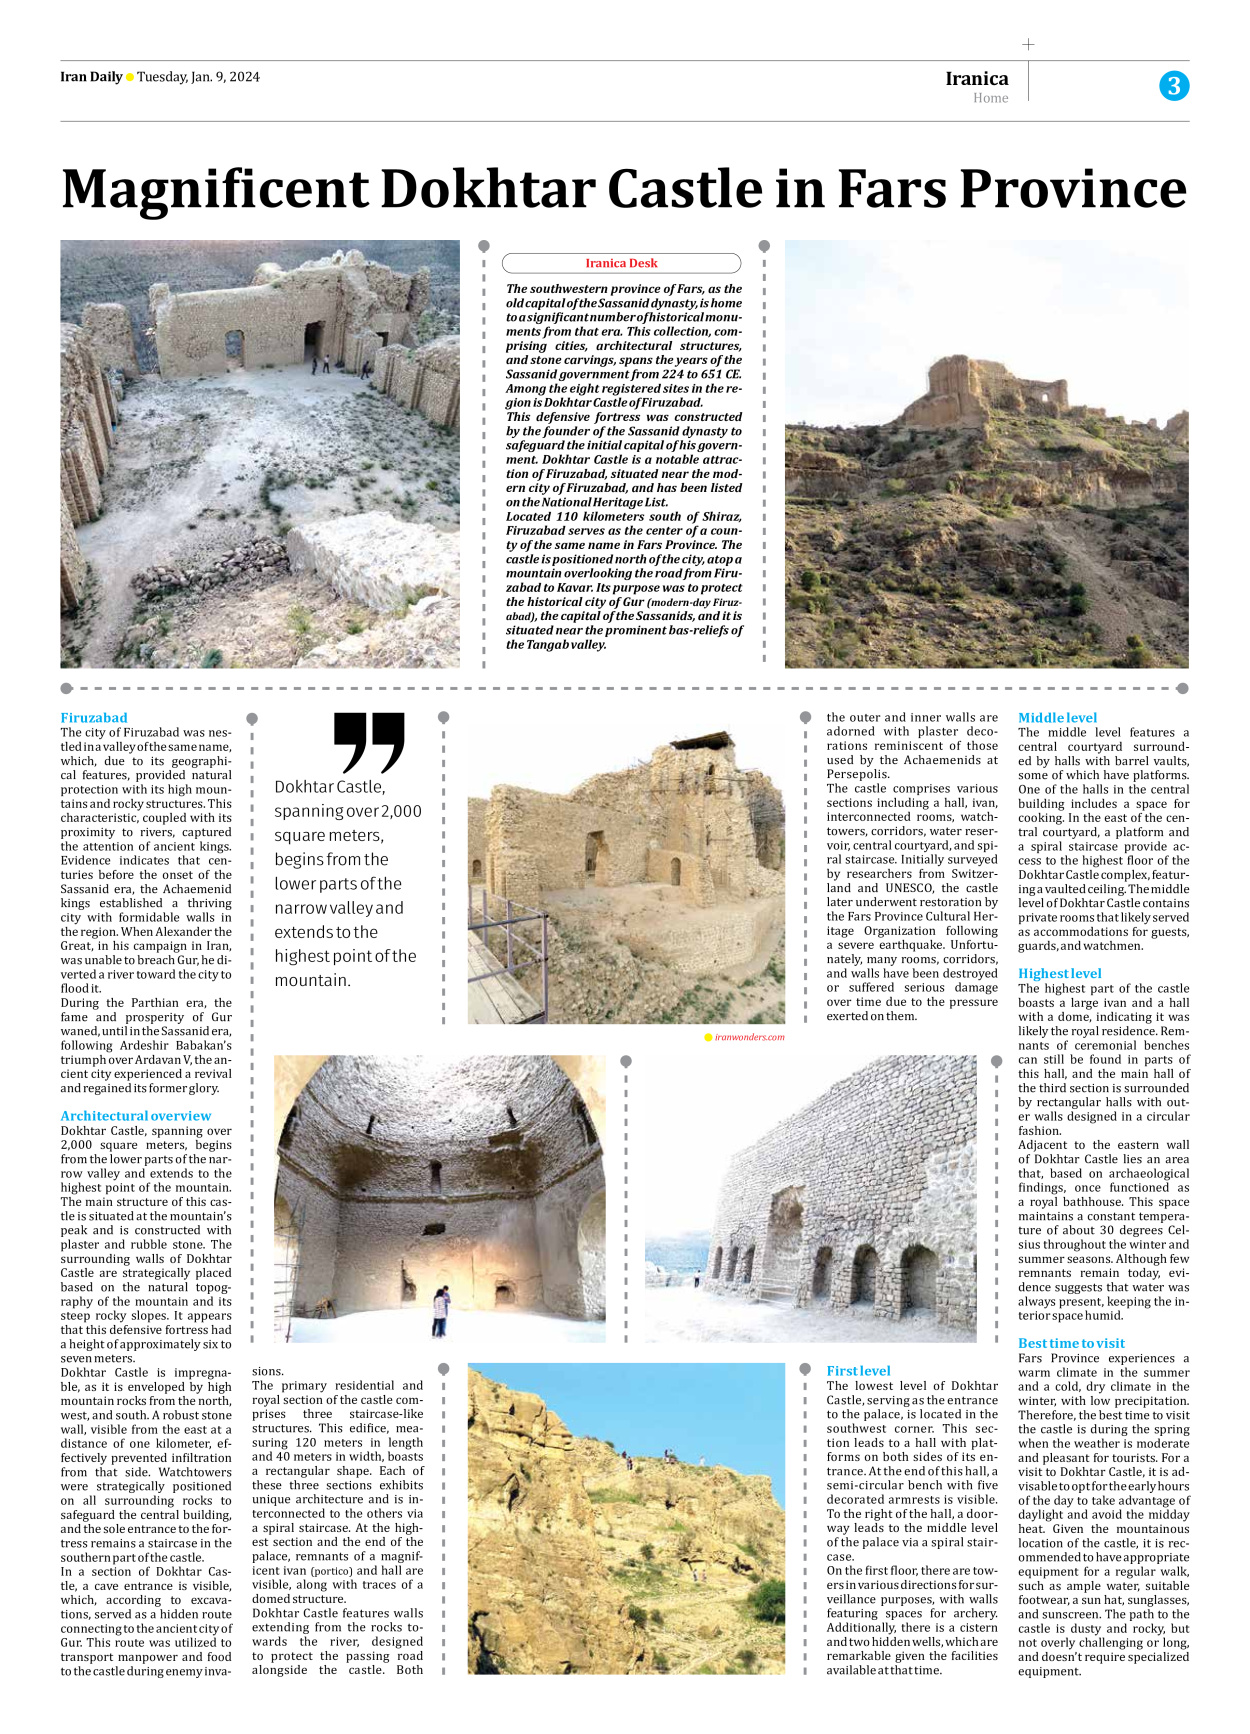 Iran Daily - Number Seven Thousand Four Hundred and Eighty - 09 January 2024 - Page 3